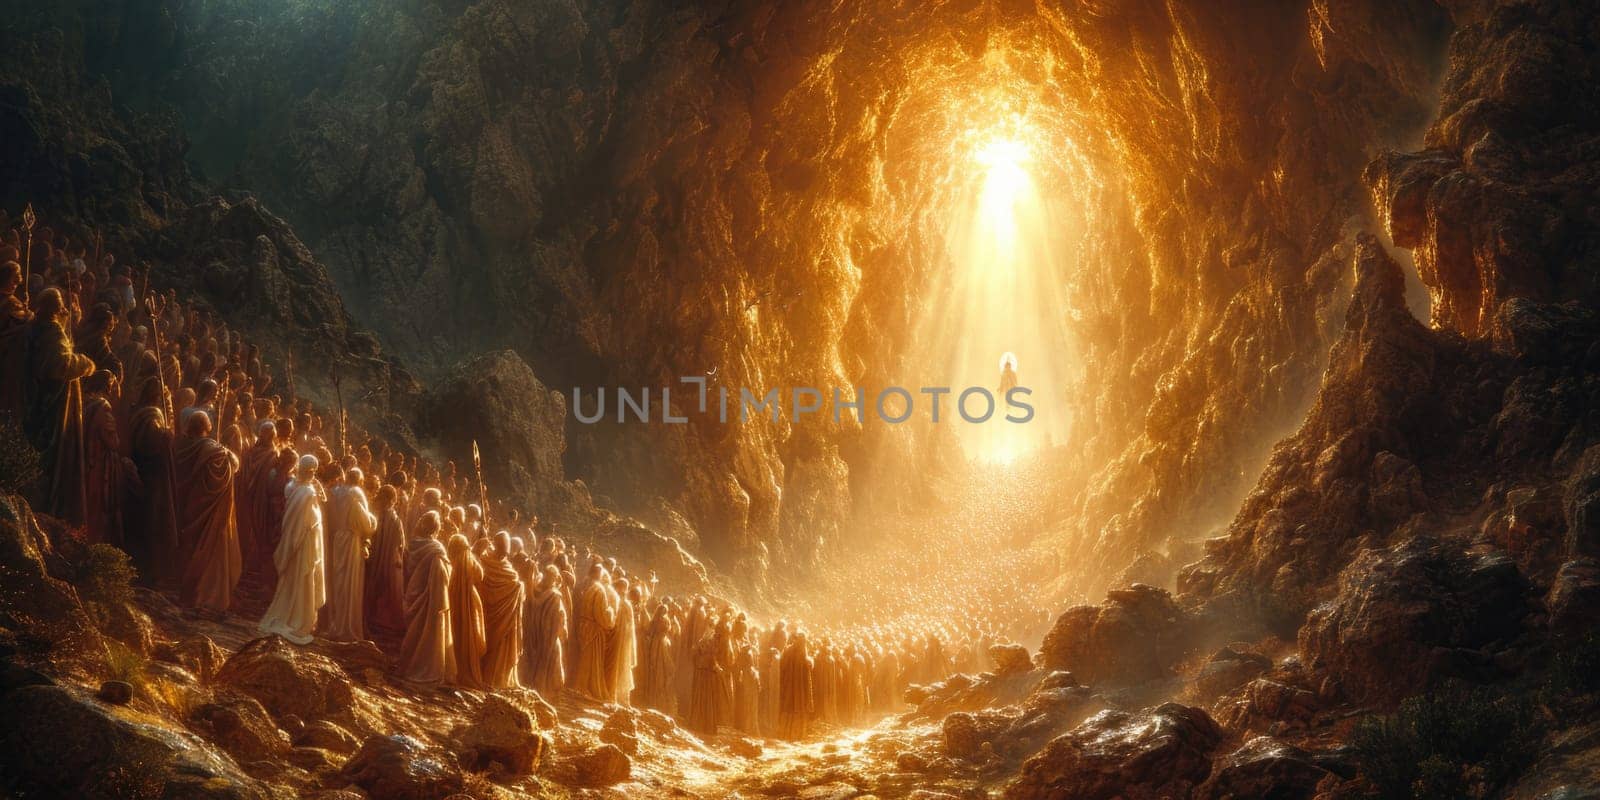 A man stands in a cave surrounded by rocks, representing the ascension of Jesus Christ into Heaven.